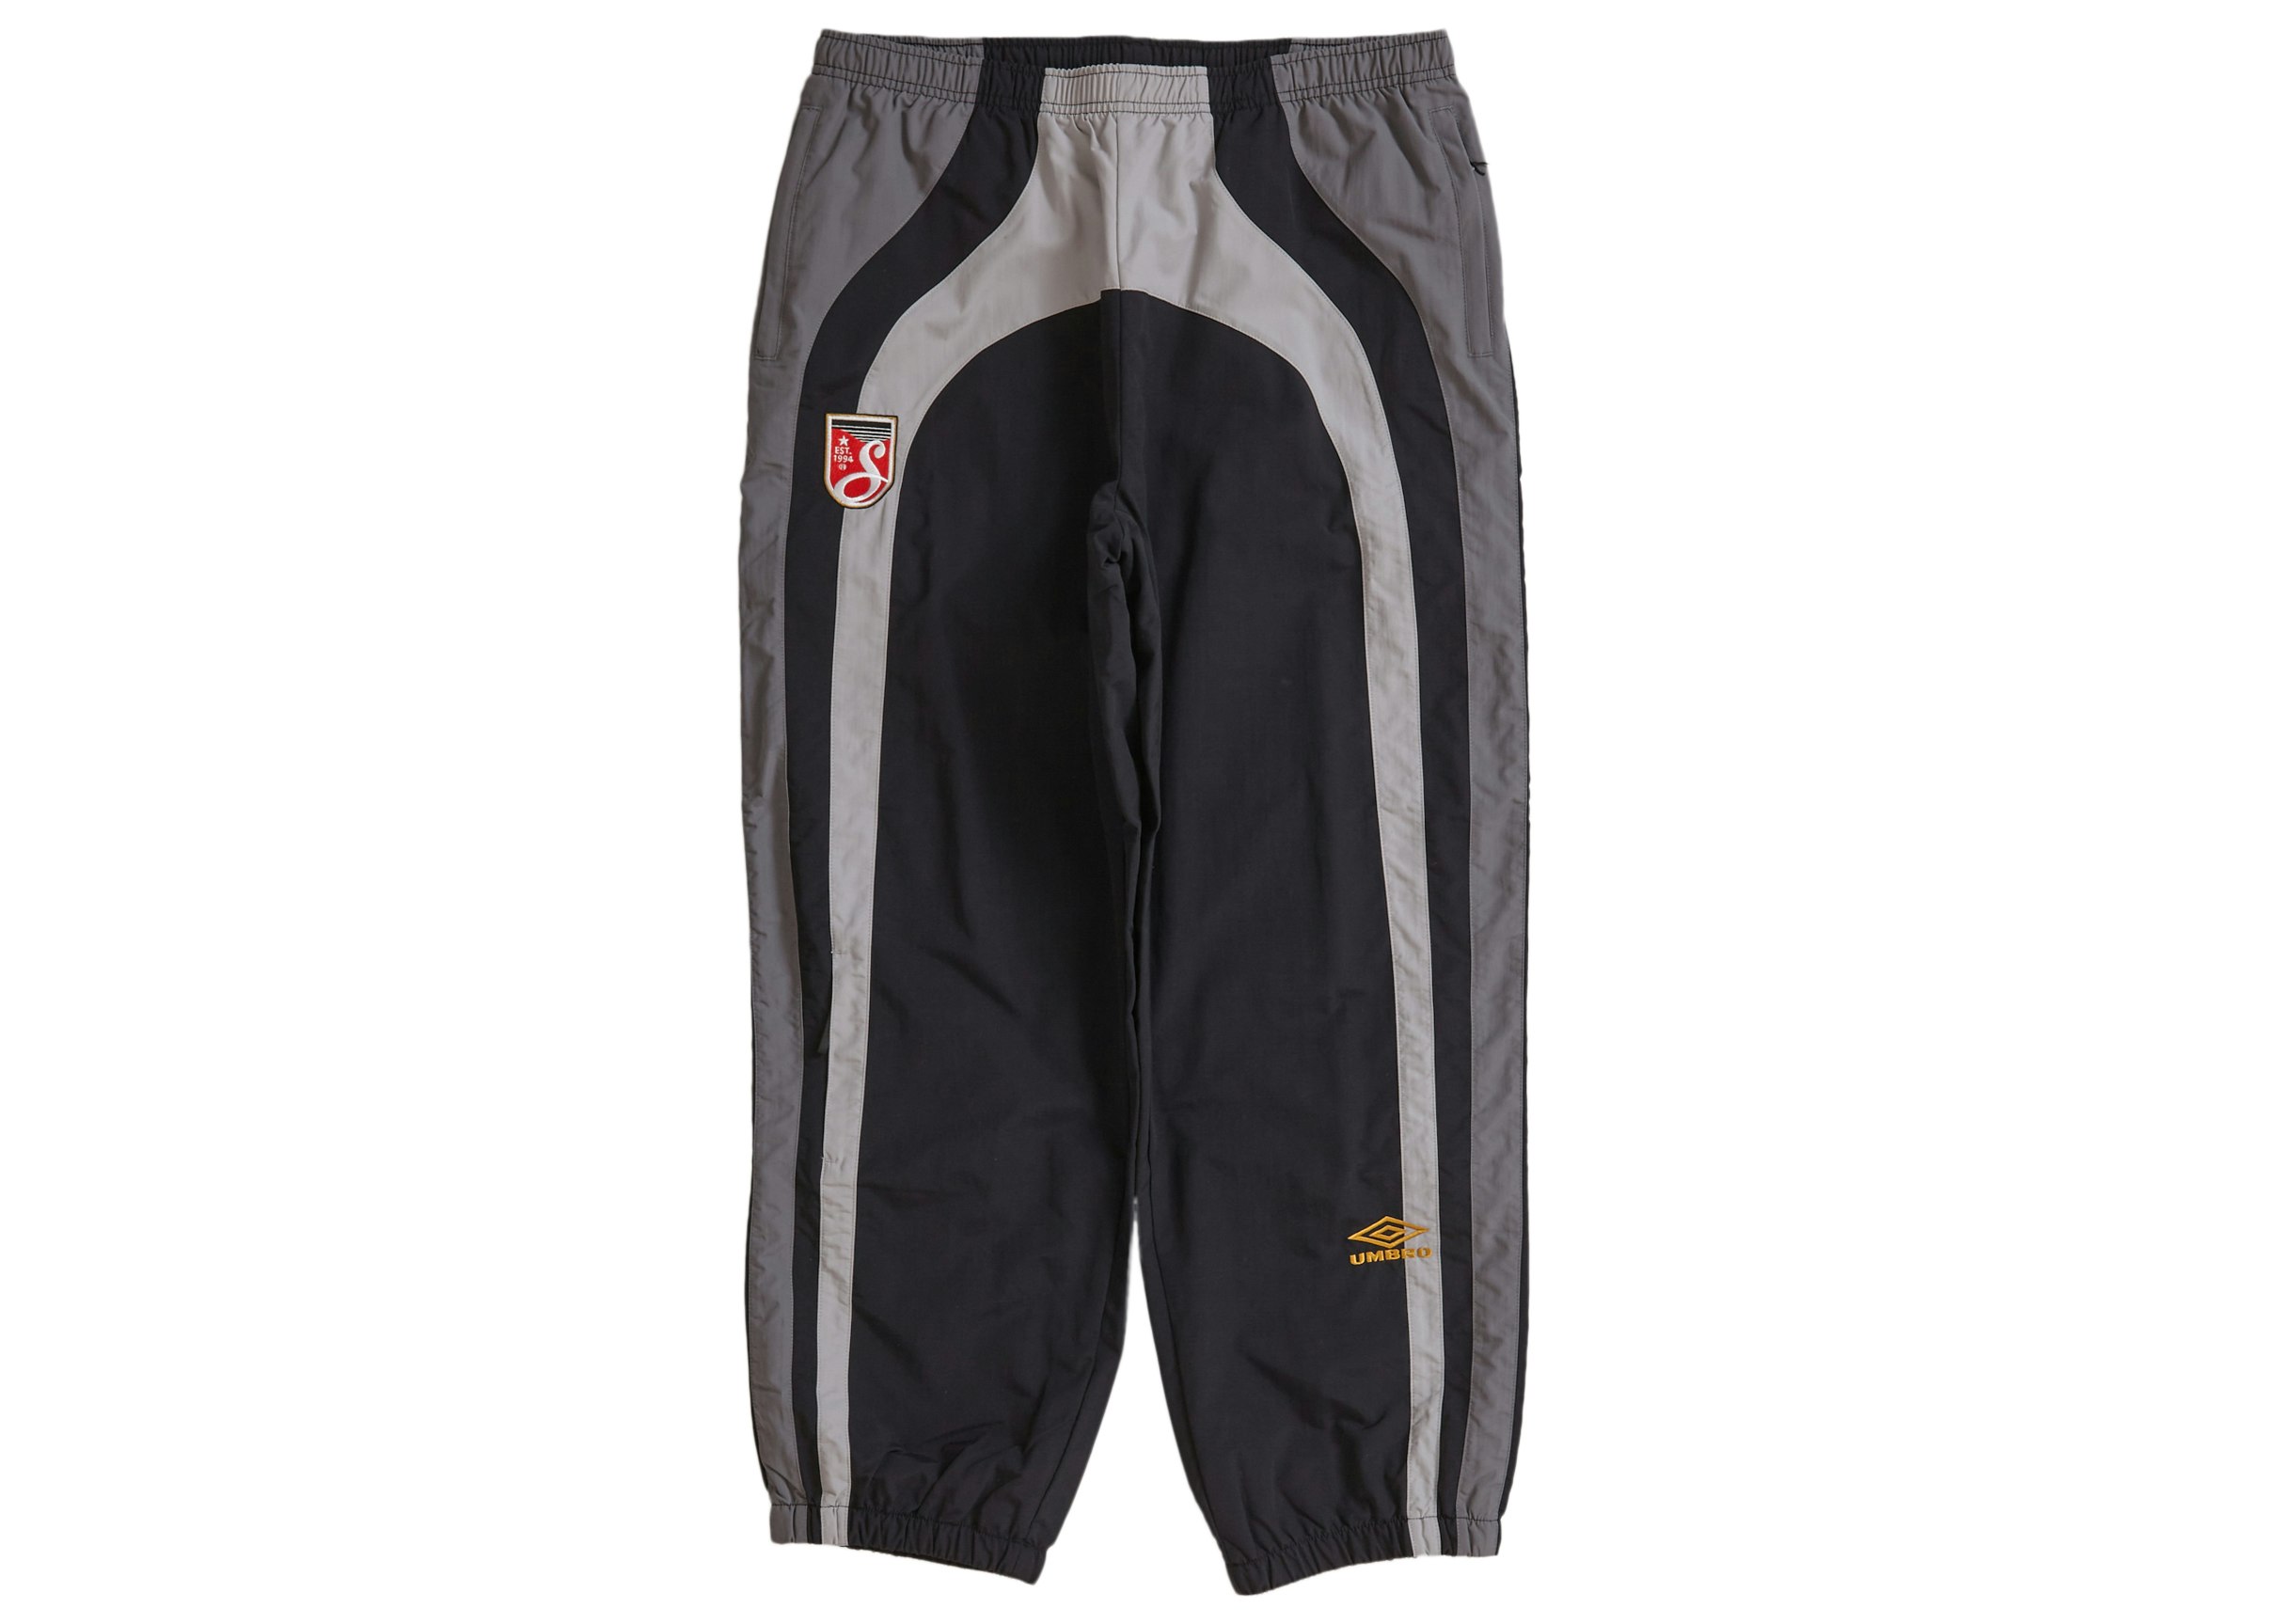 Umbro Men's Taped Track Pant : Amazon.in: Clothing & Accessories